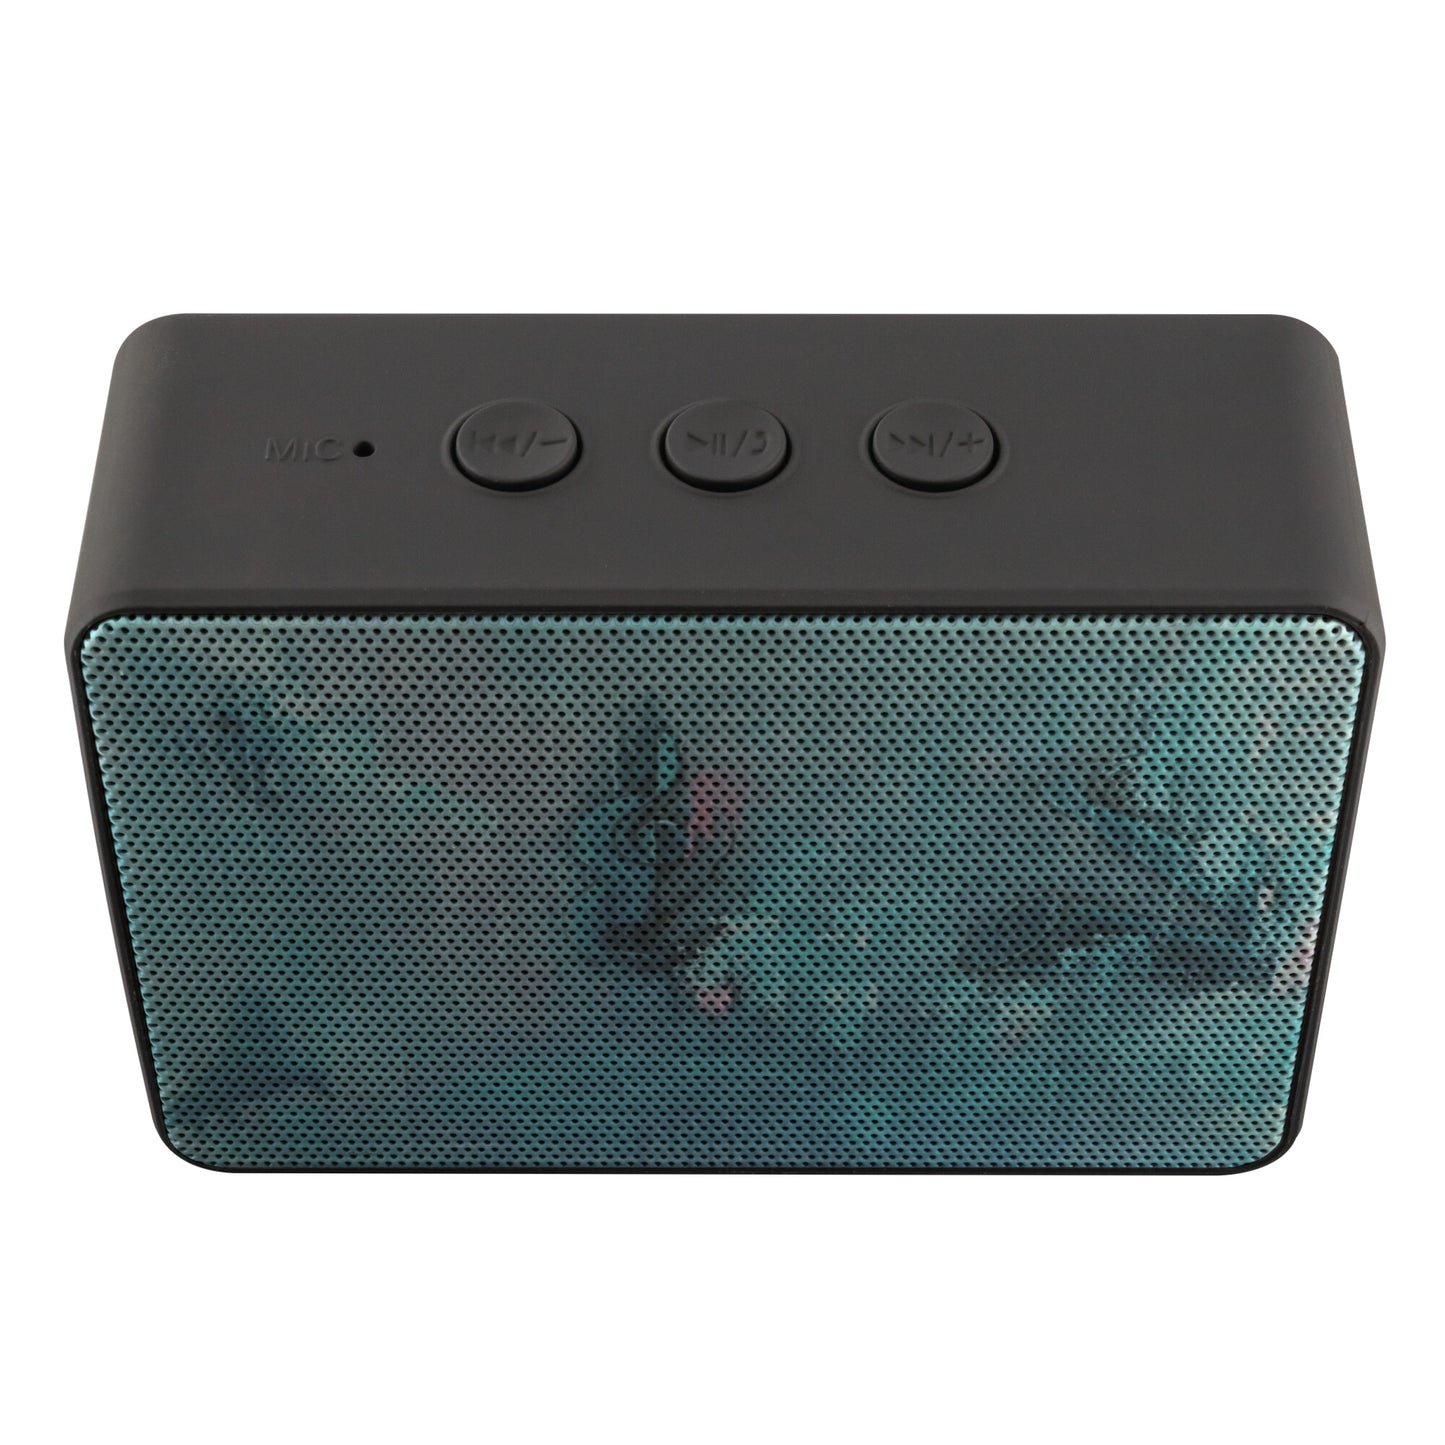 Portable Bluetooth Speaker: Playing the Blues